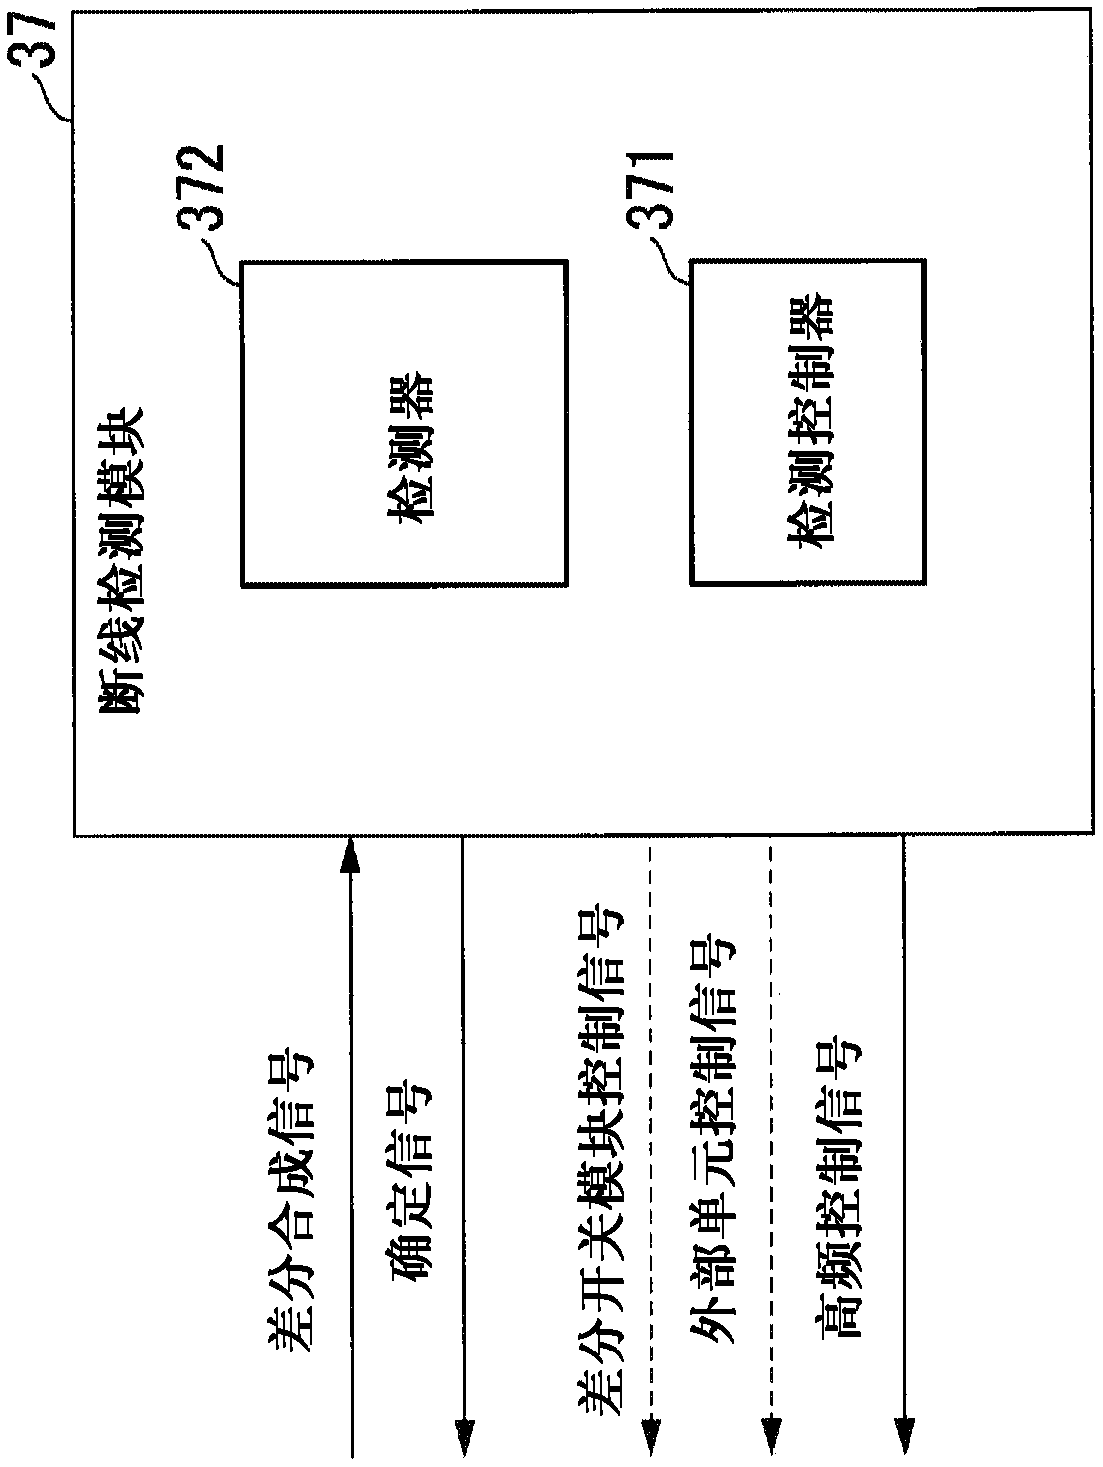 Disconnection detecting device, signal processing unit and disconnection detection method